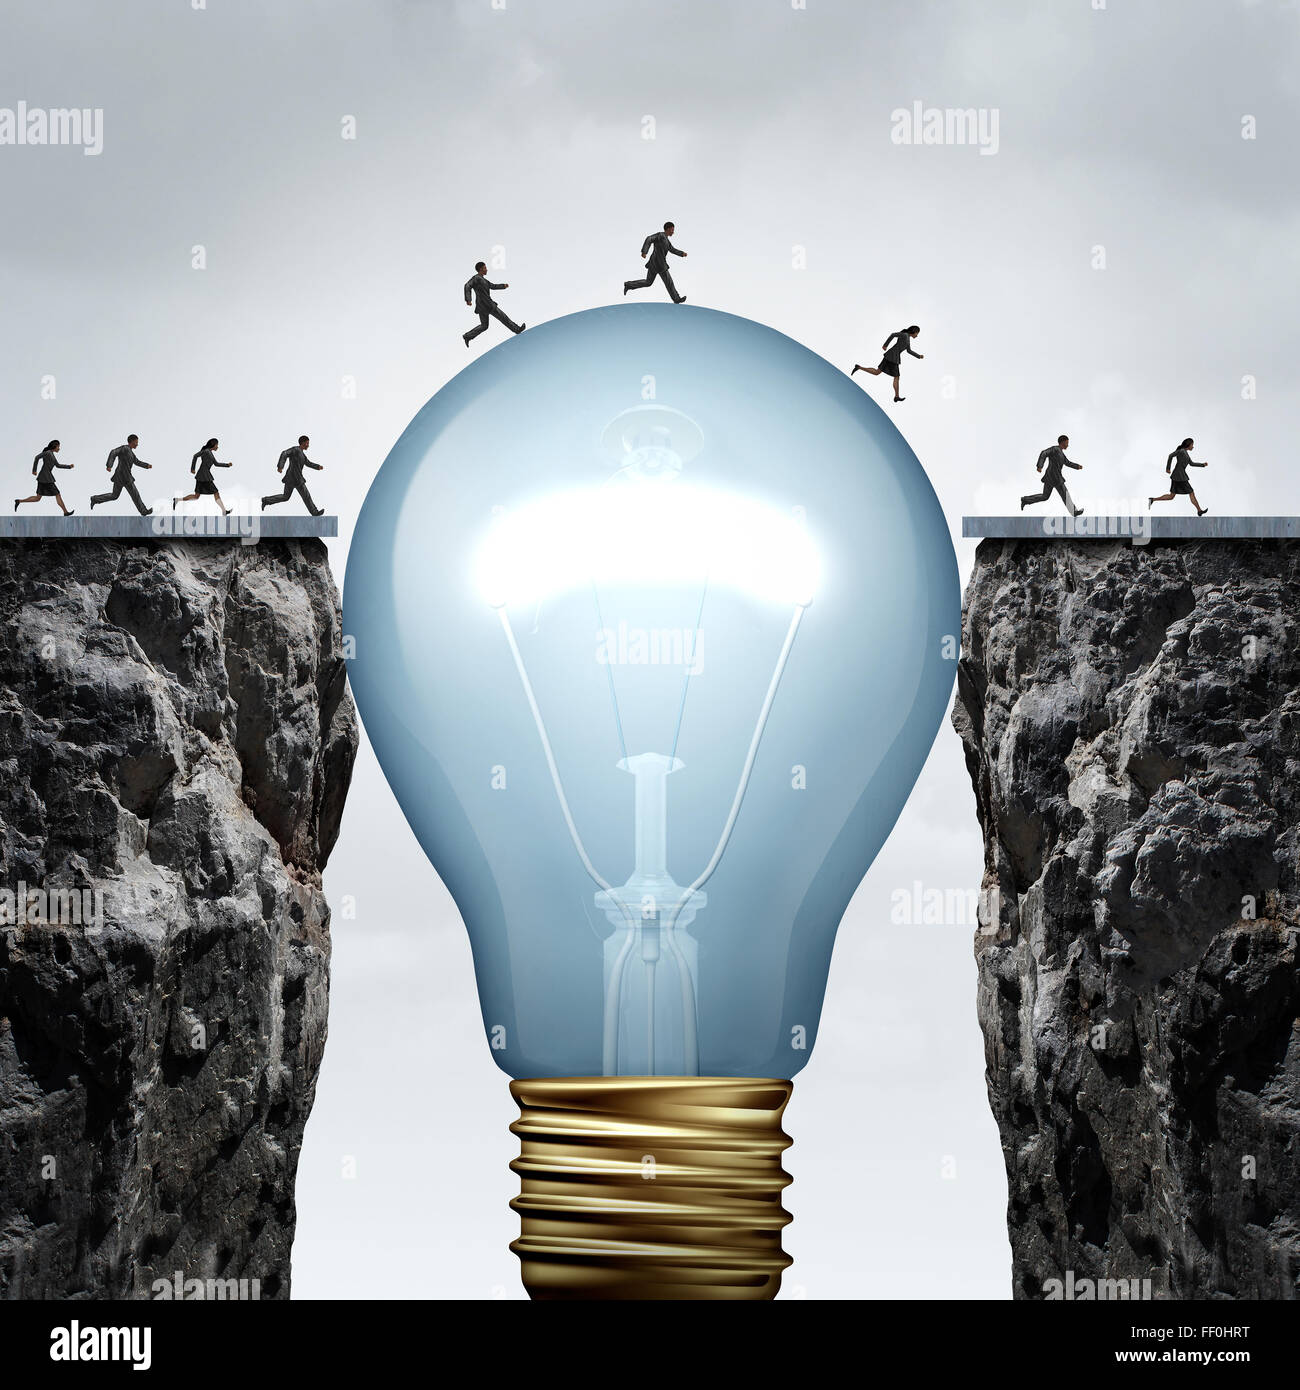 Creativity business idea solution as a group of people on two divided cliffs being connected by a giant light bulb closing the gap and creating a bridge to enable a crossing to success as a cretive thinking metaphor.. Stock Photo